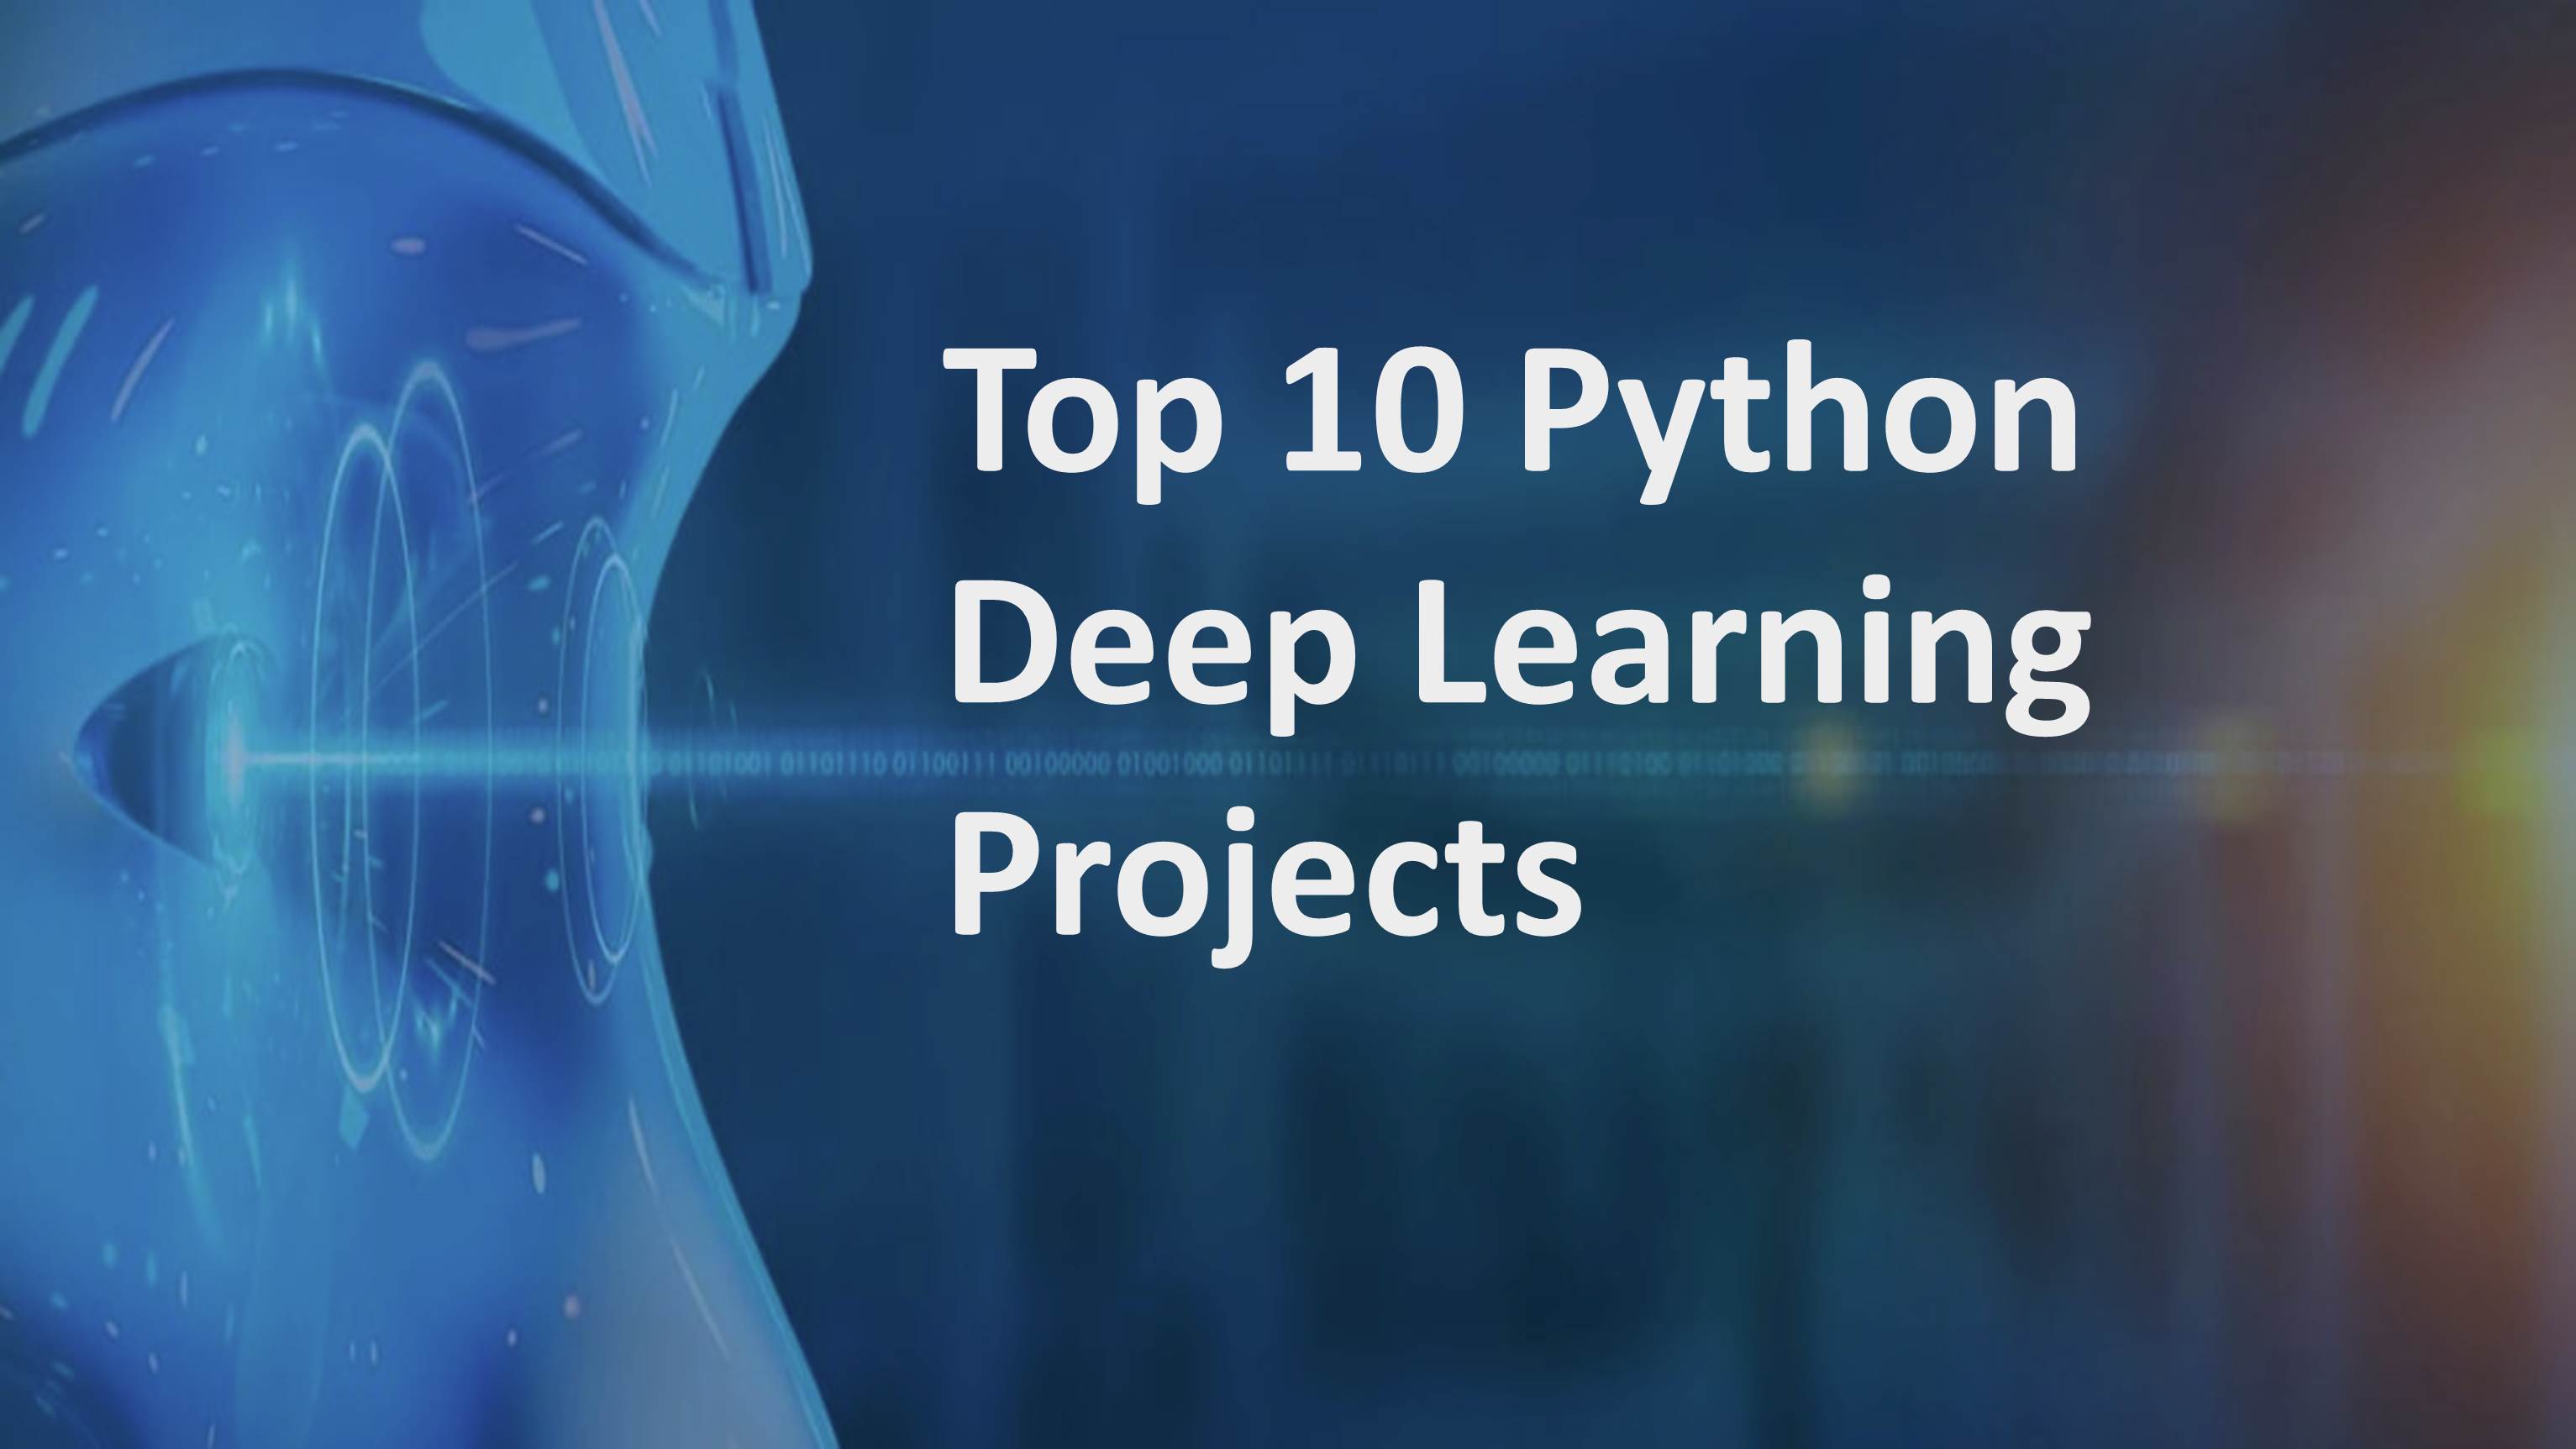 Top 10 Python Deep Learning Projects